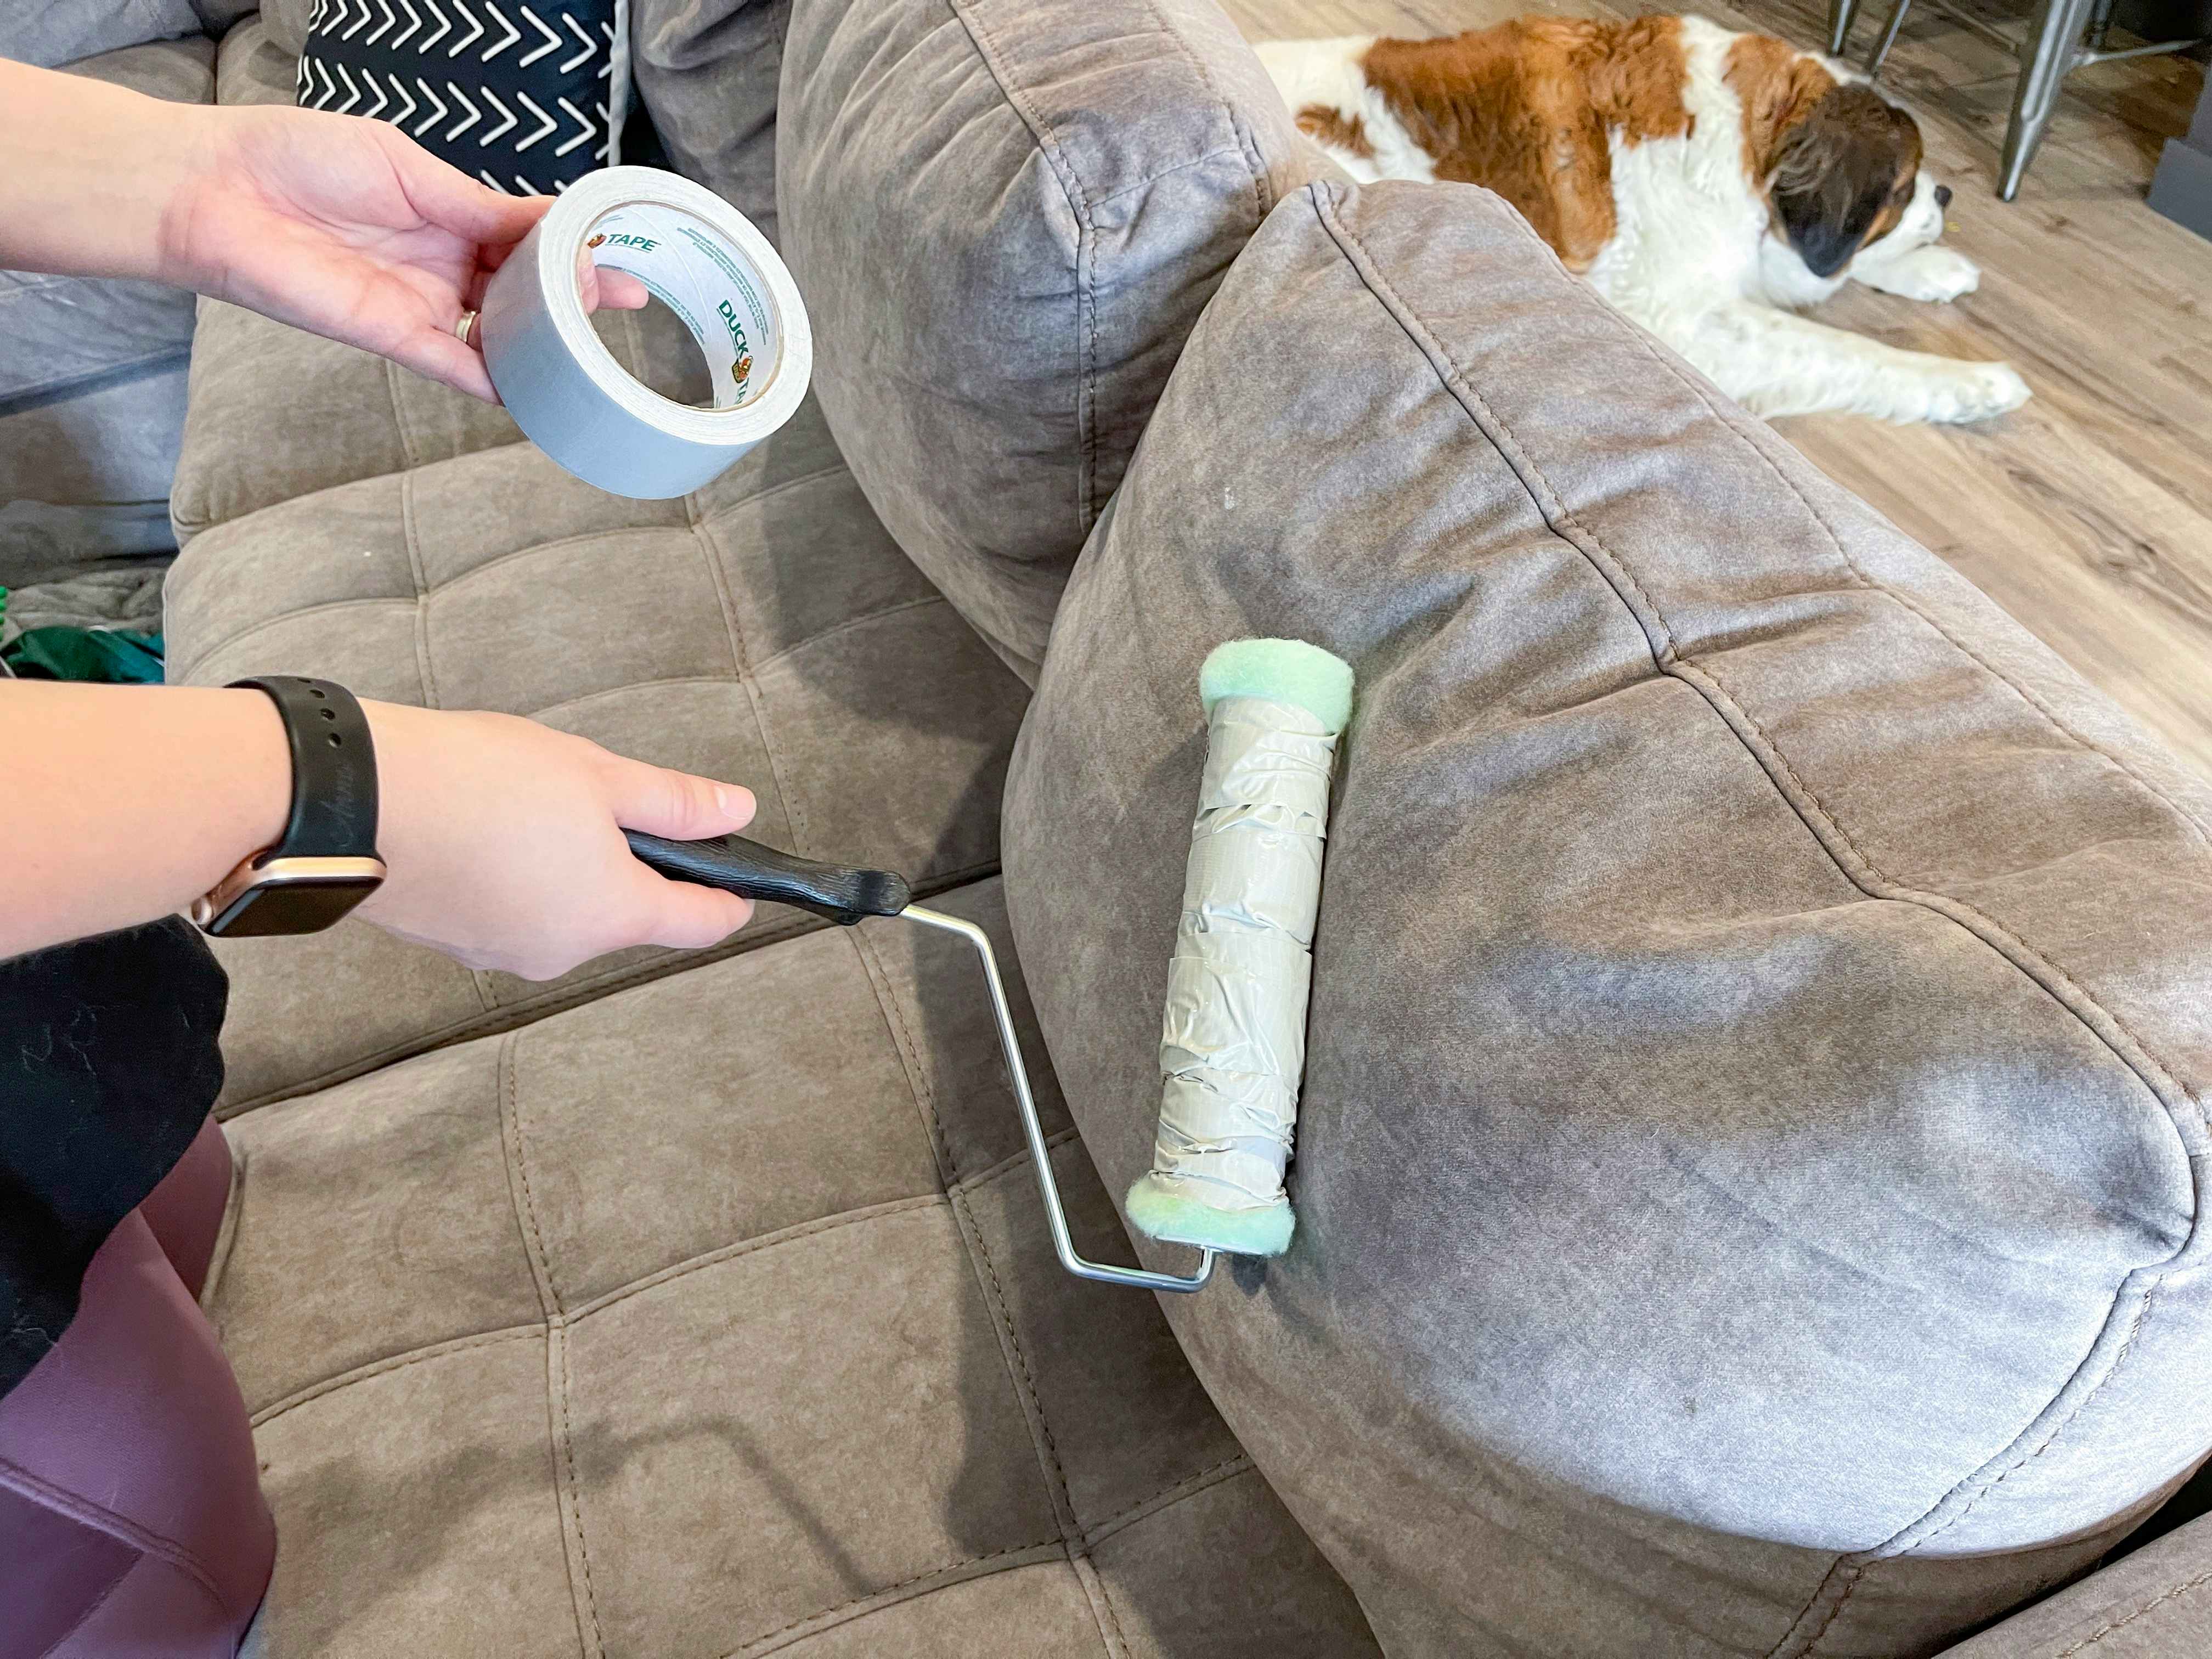 This Simple Pet Hair Hack Is A Game Changer For Owners